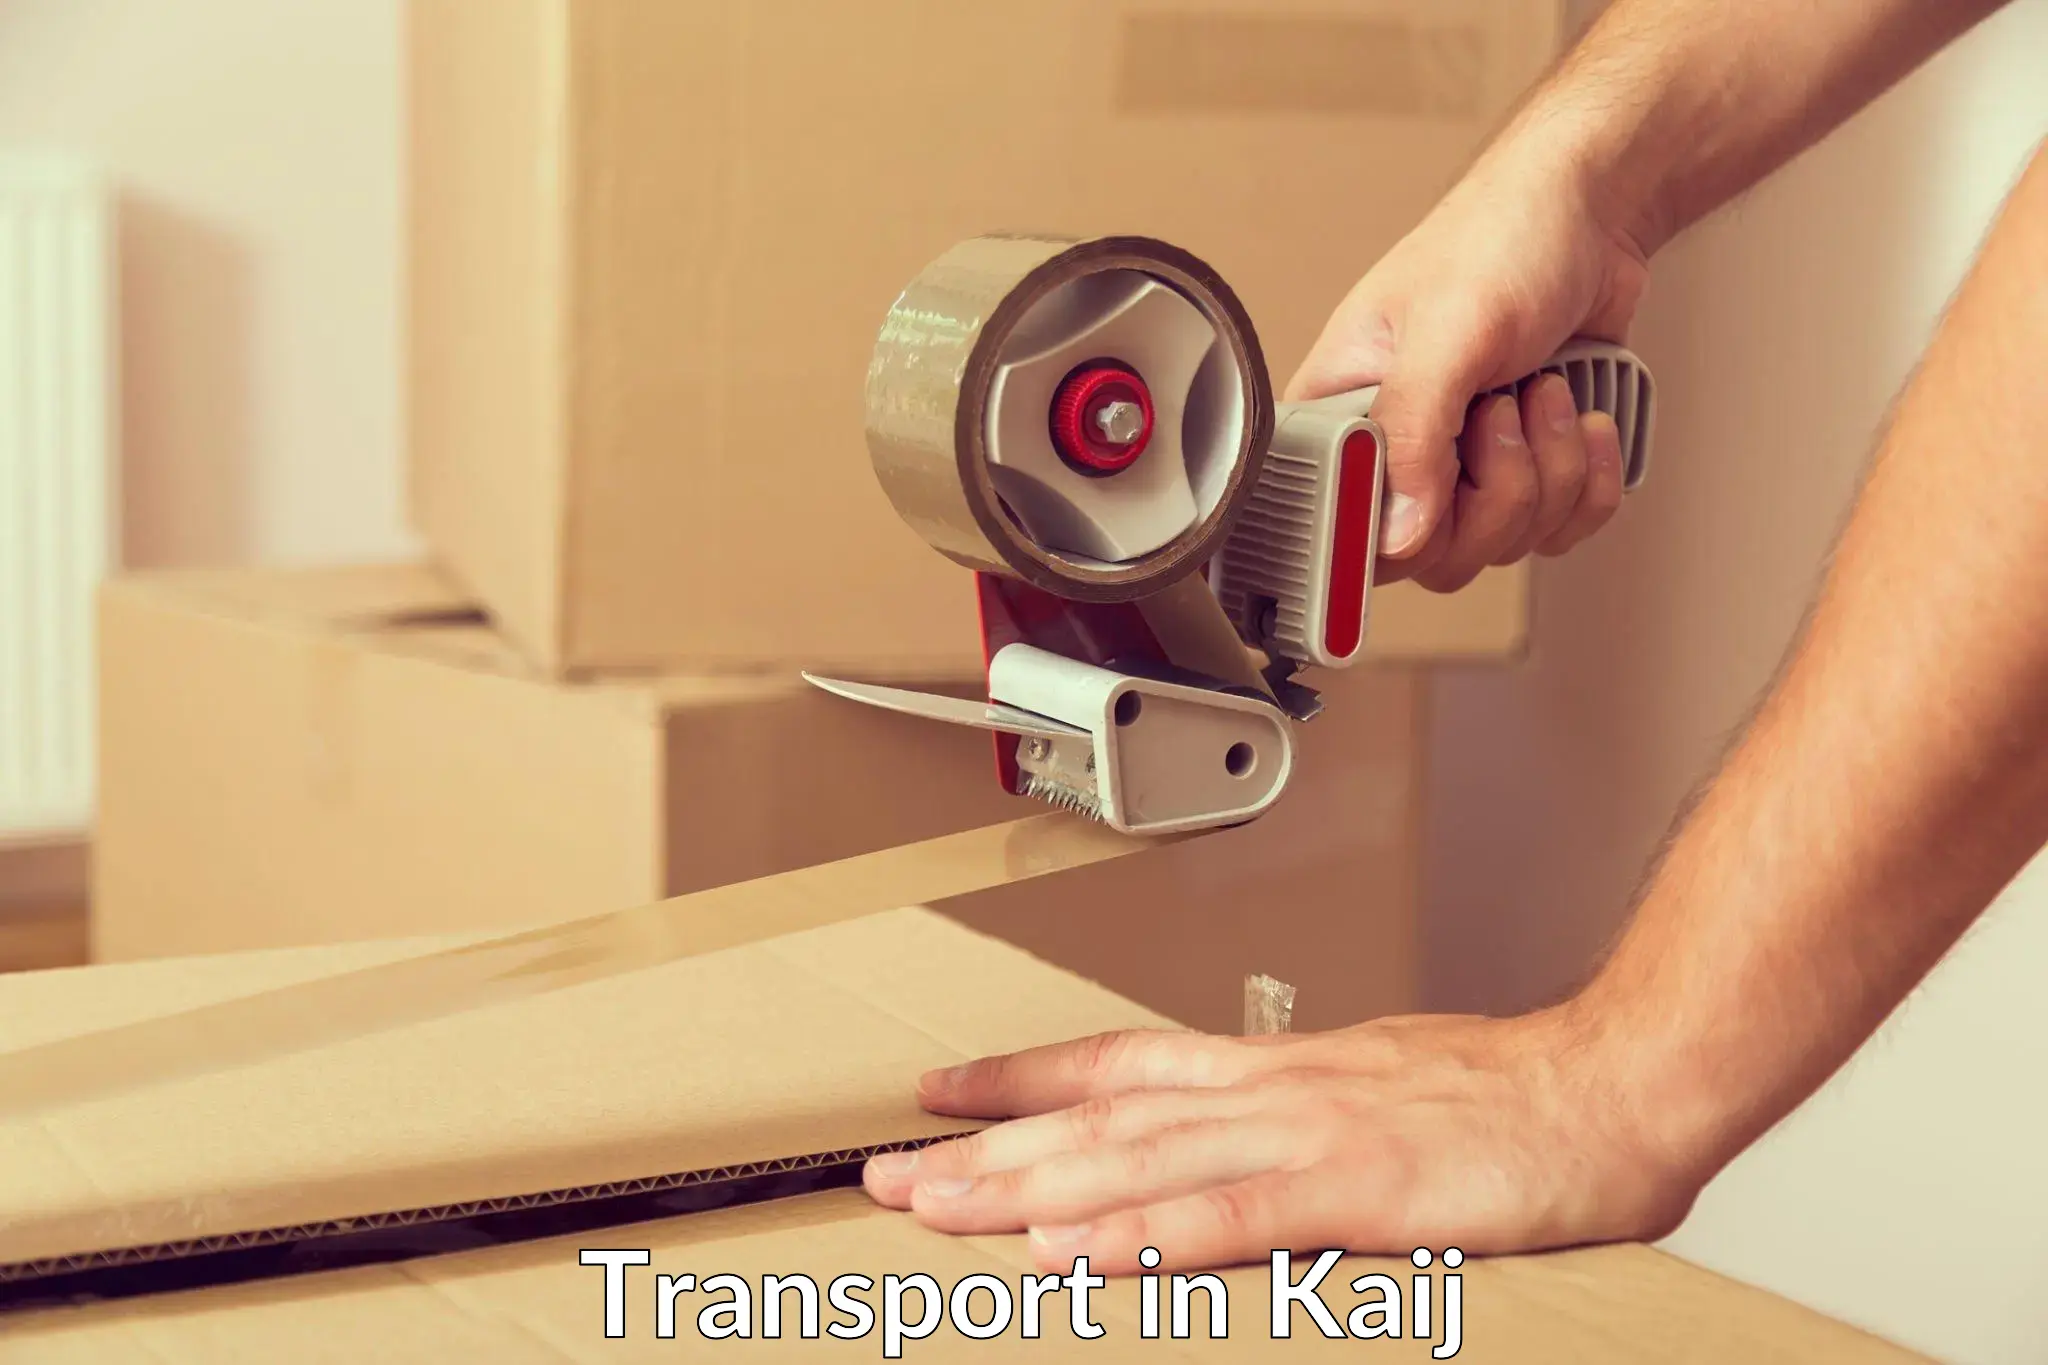 Daily parcel service transport in Kaij